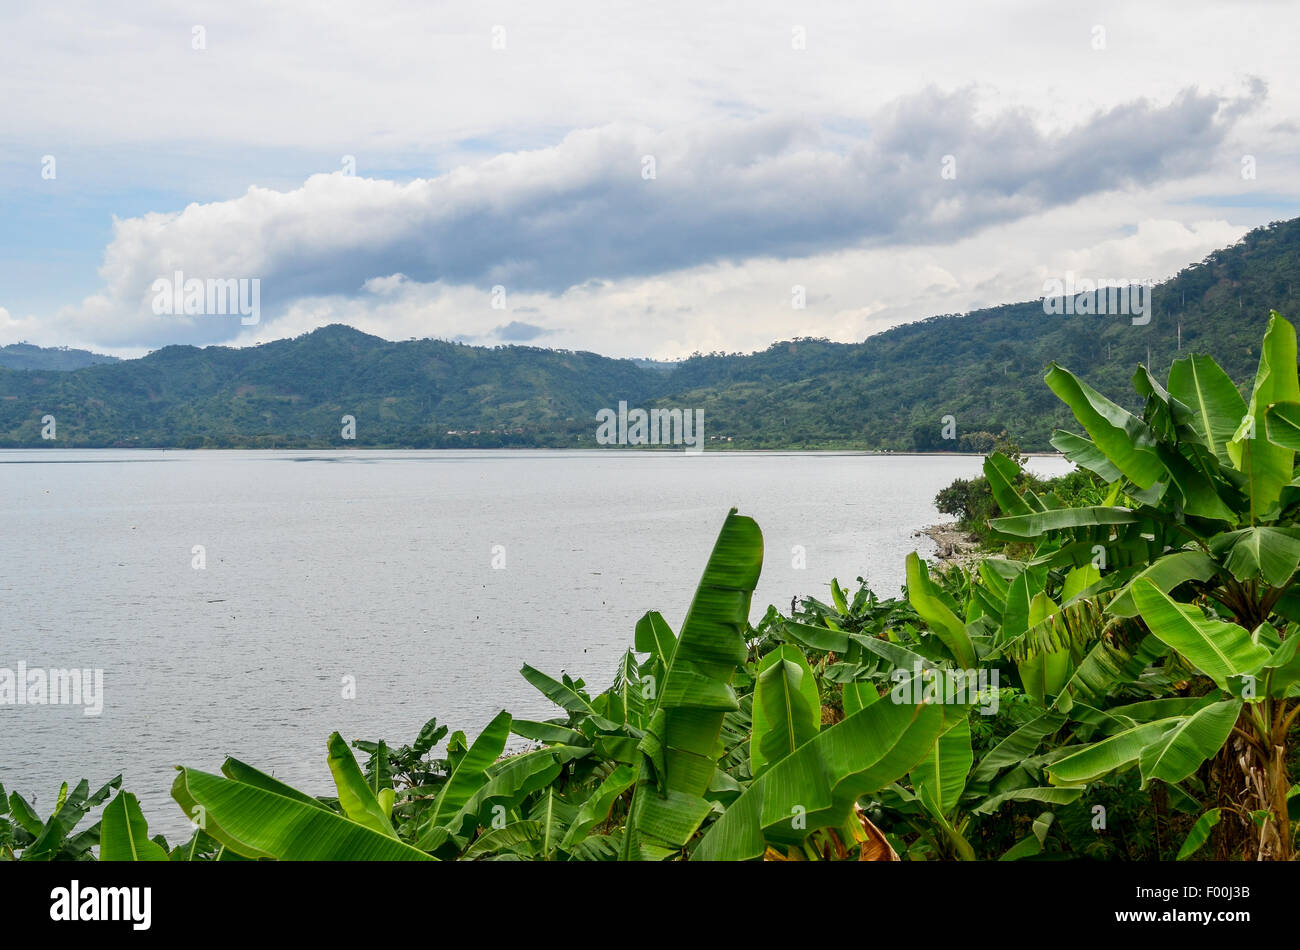 Lake Bosomtwe, a popular tourist destination near Kumasi, Ghana. It's a sacred lake situated within a meteorite impact crater Stock Photo